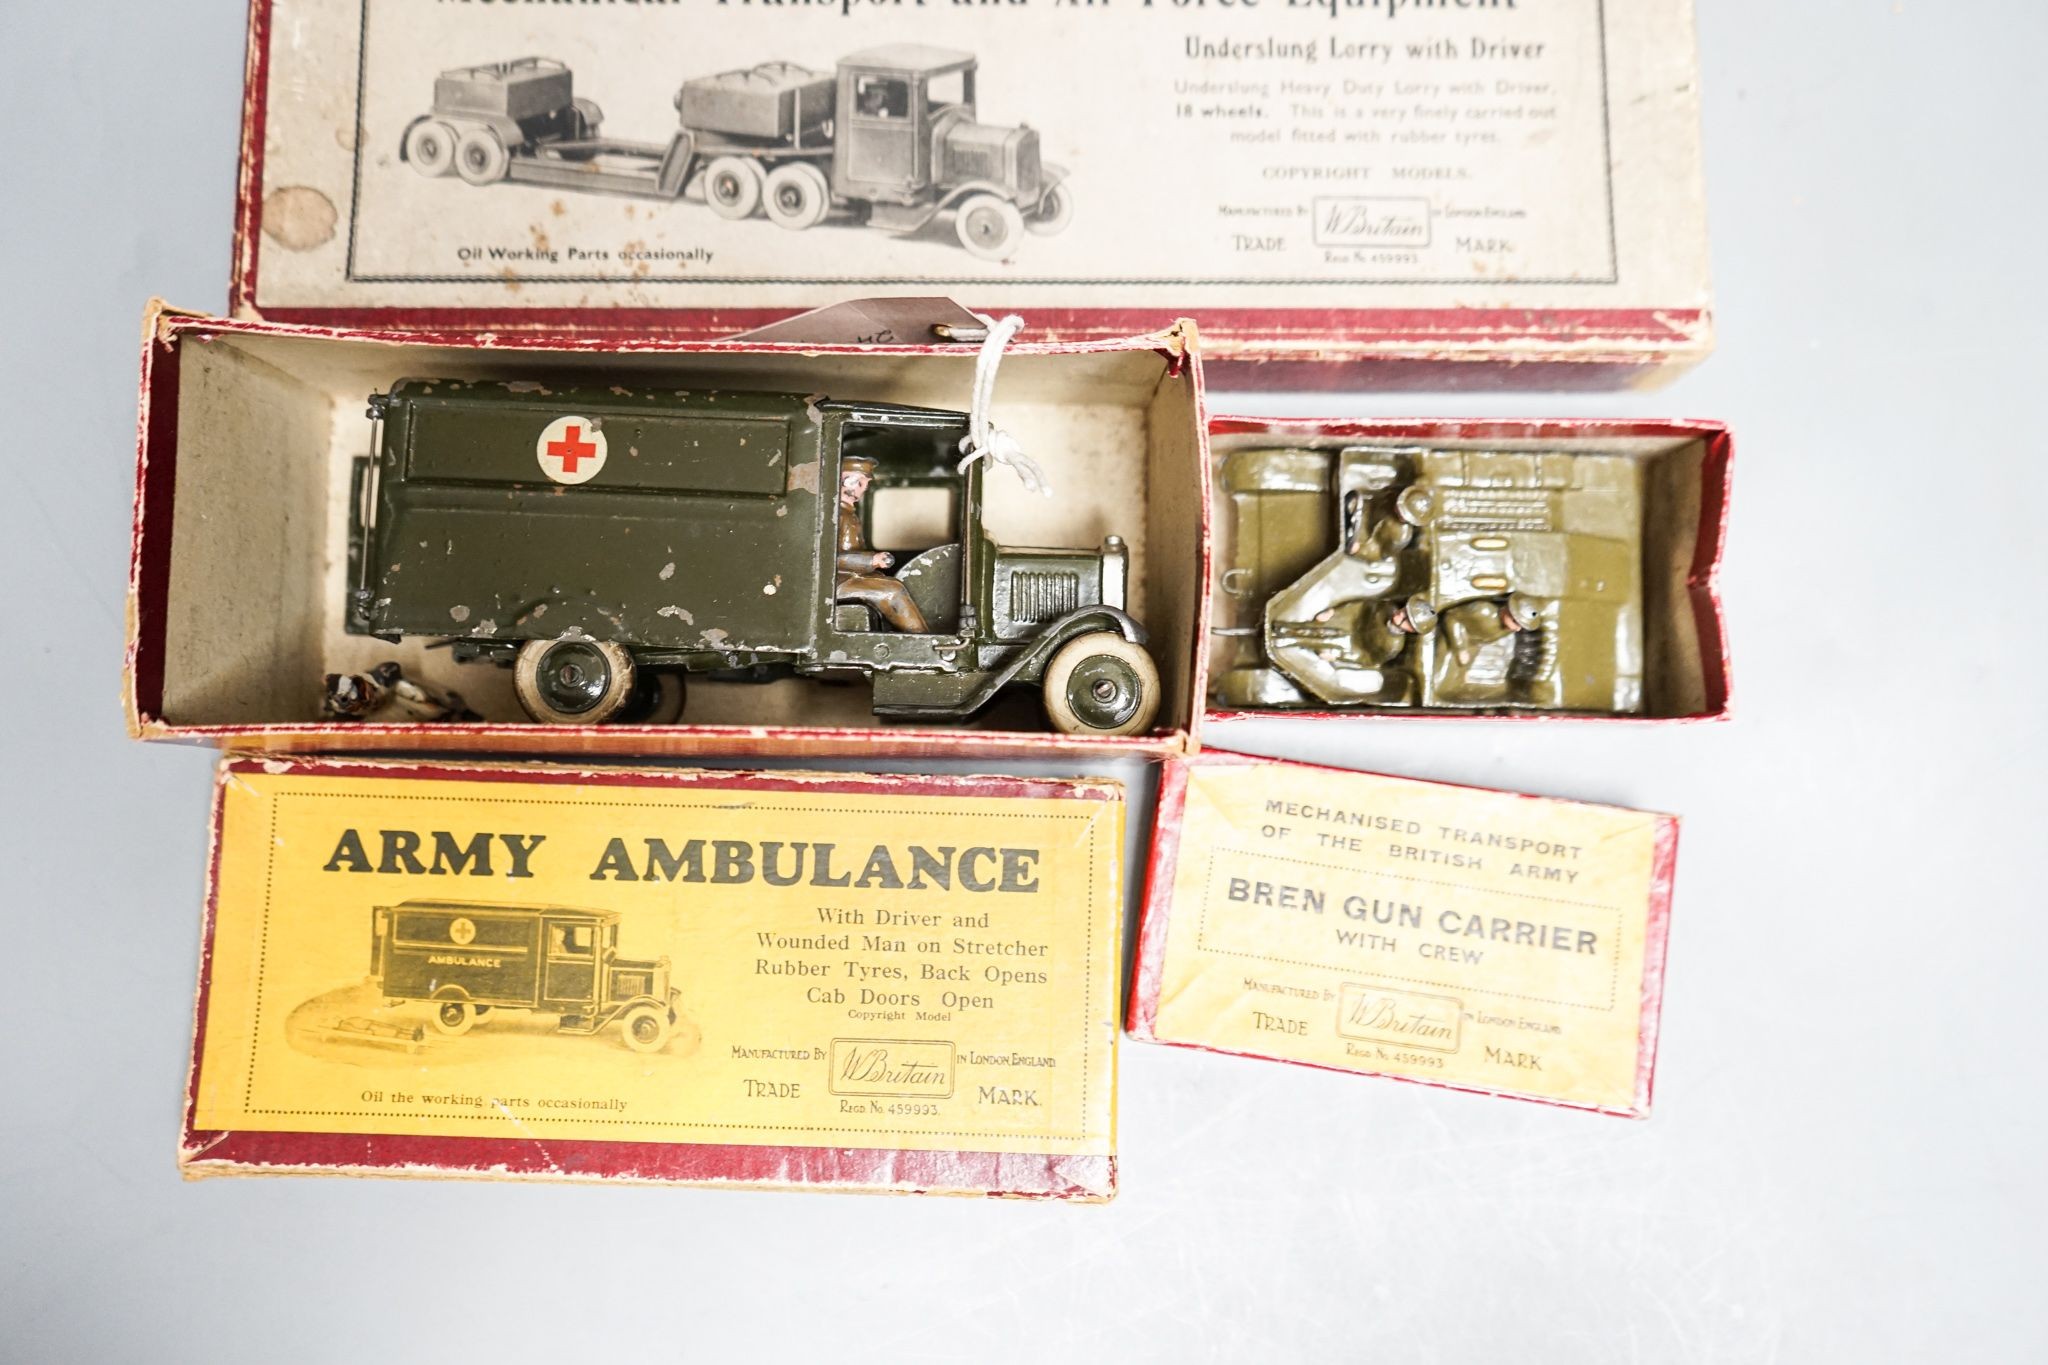 Britain's 1641 Mechanical Transport and Air Force Equipment 1512 Khaki Army Ambulance and 1876 Bren Gun Carrier all in original boxes, pre-war